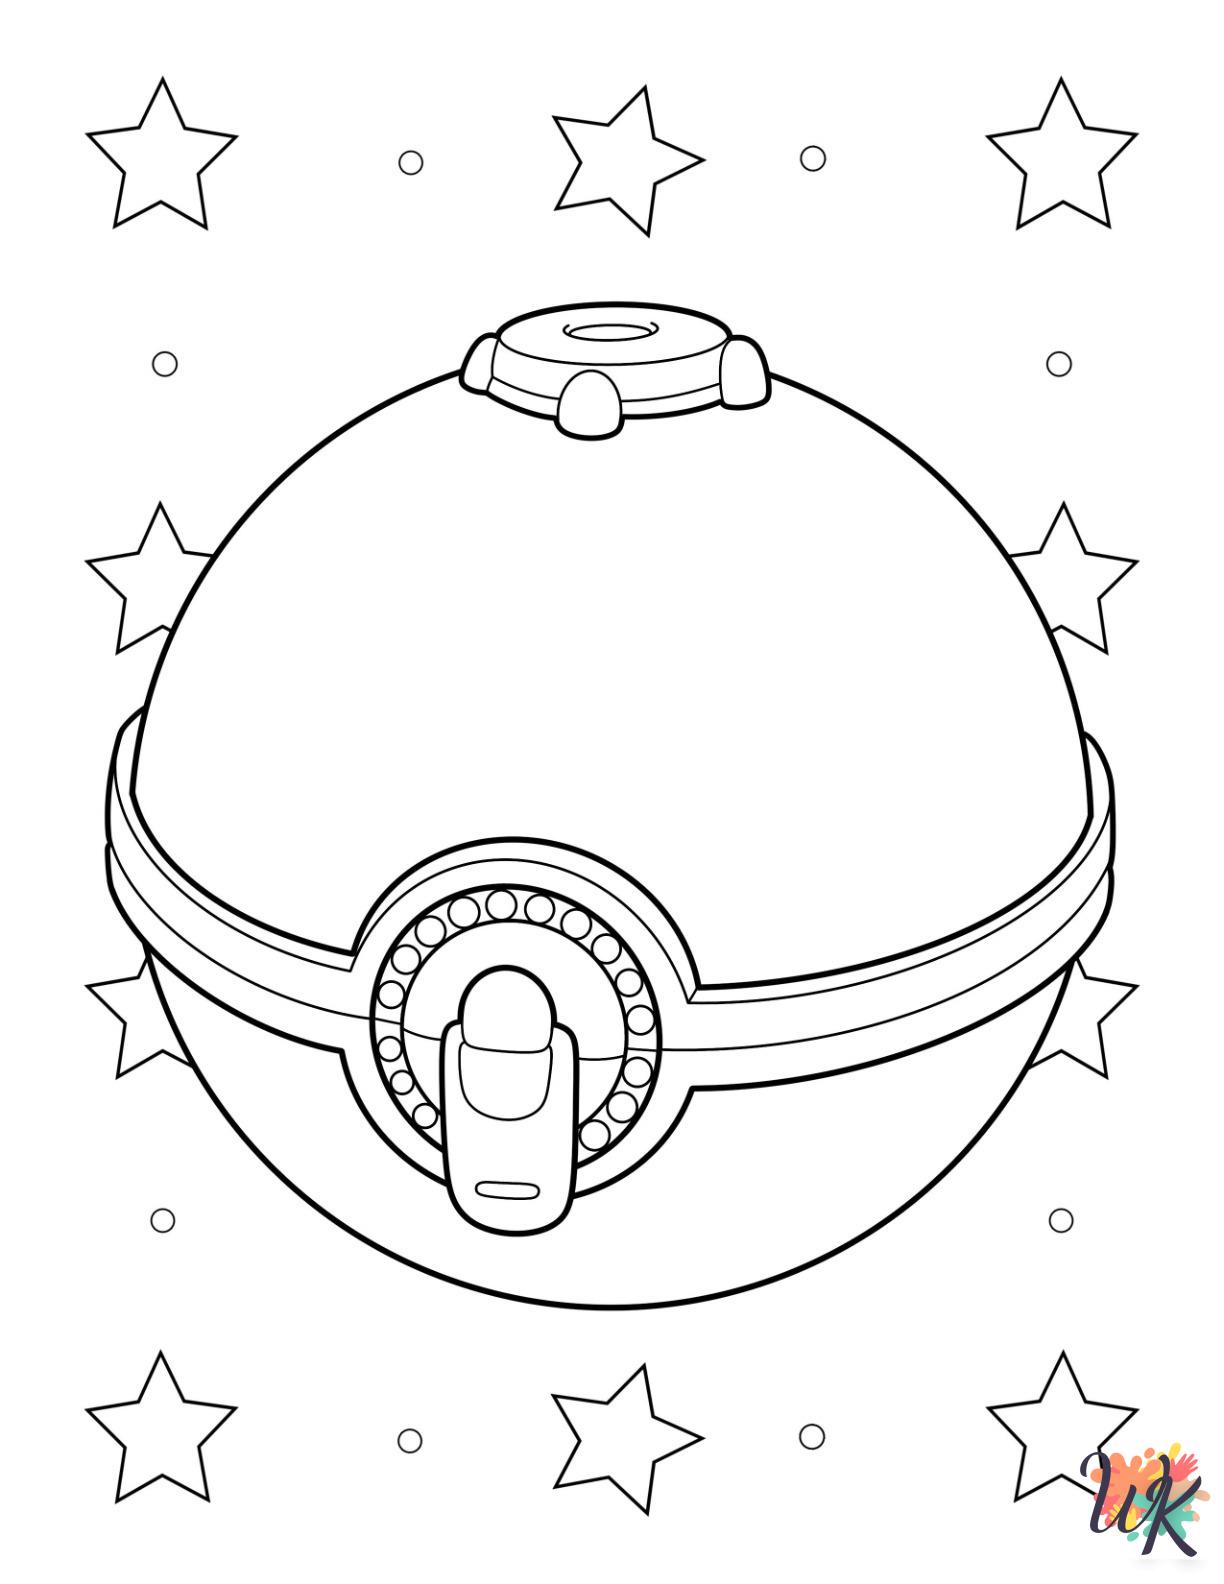 fun Pokeball coloring pages